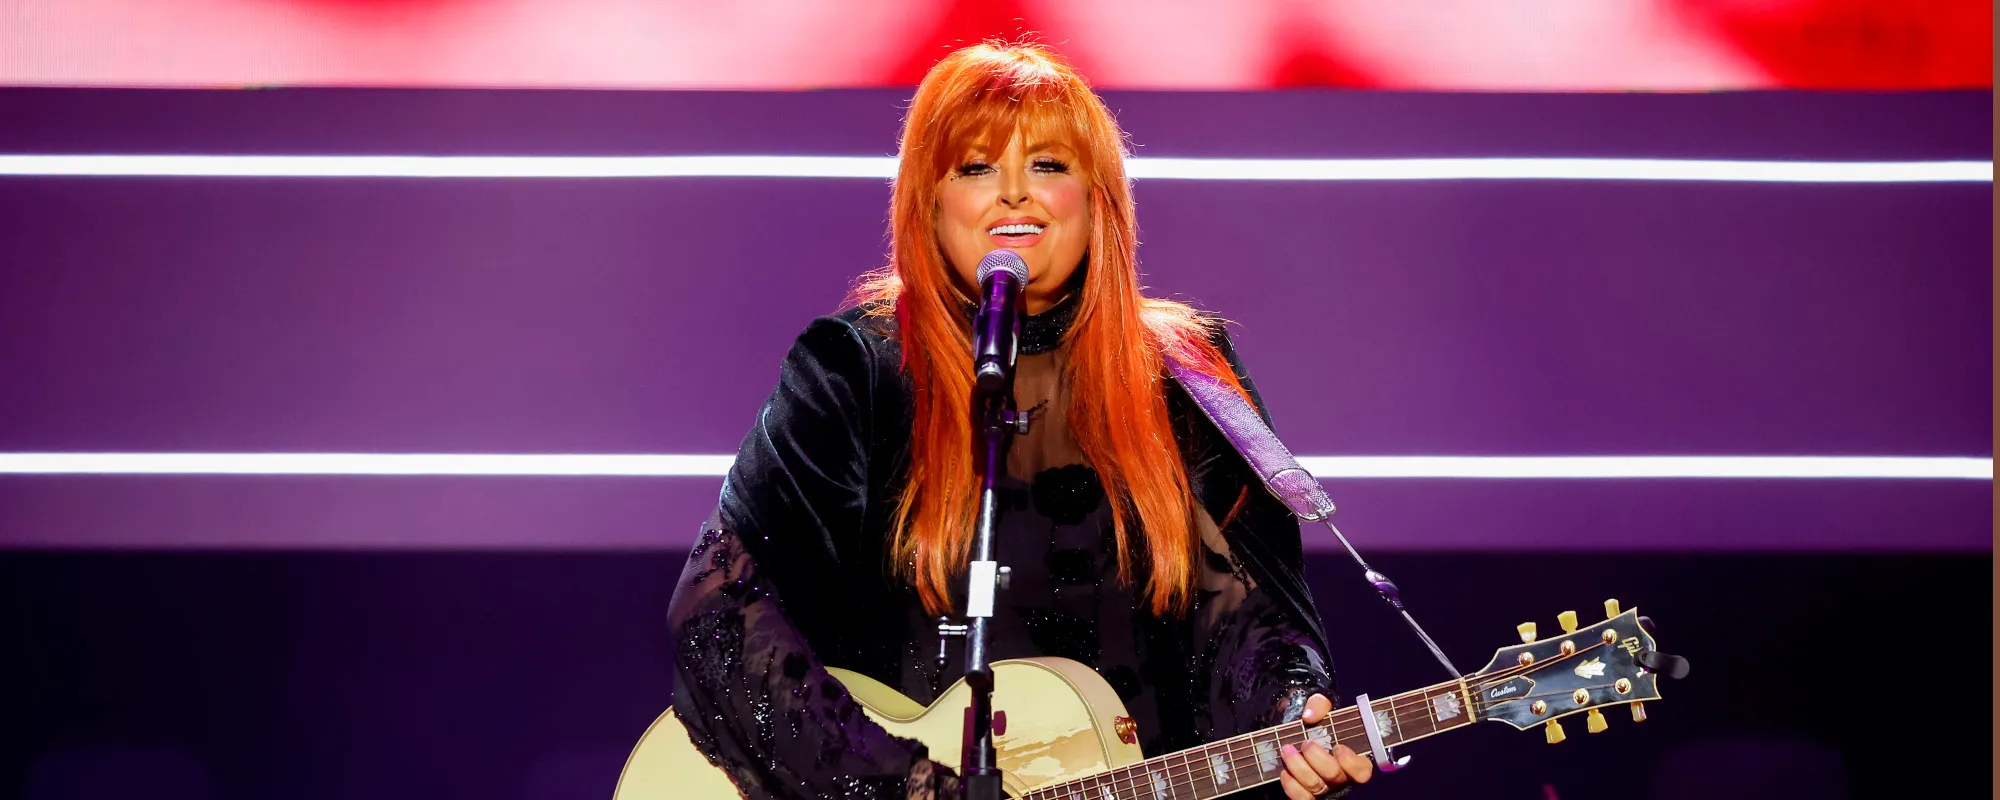 Wynonna Judd to Host Star-Studded ‘Christmas at the Opry’ Television Special